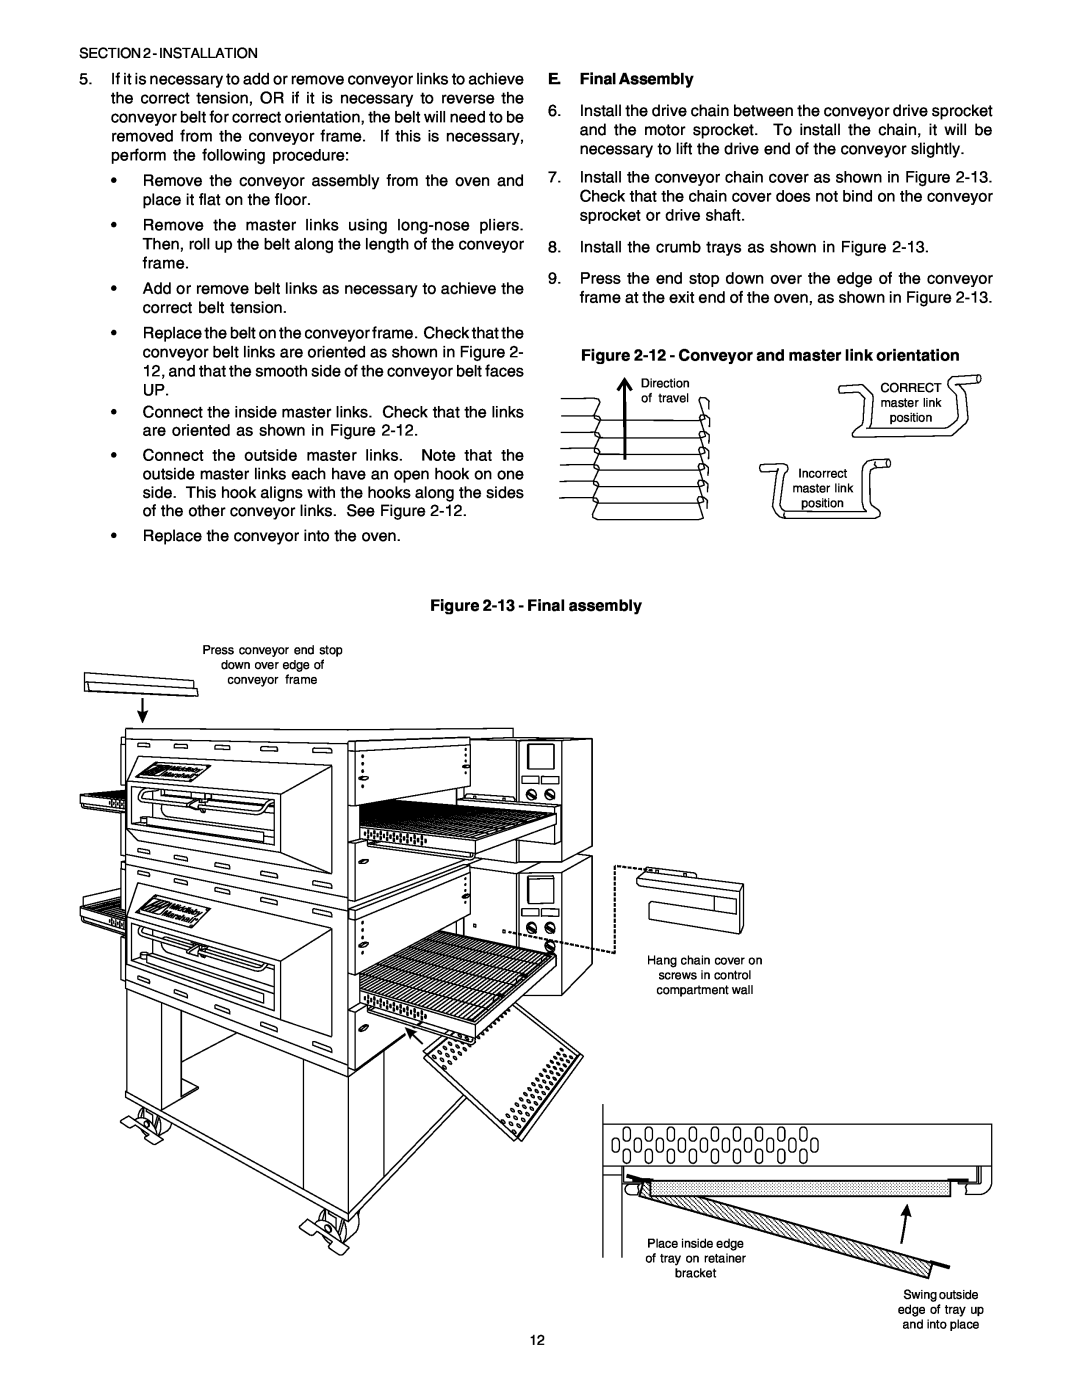 Middleby Marshall PS53GS Gas manual E. Final Assembly, 12 - Conveyor and master link orientation, 13 - Final assembly 